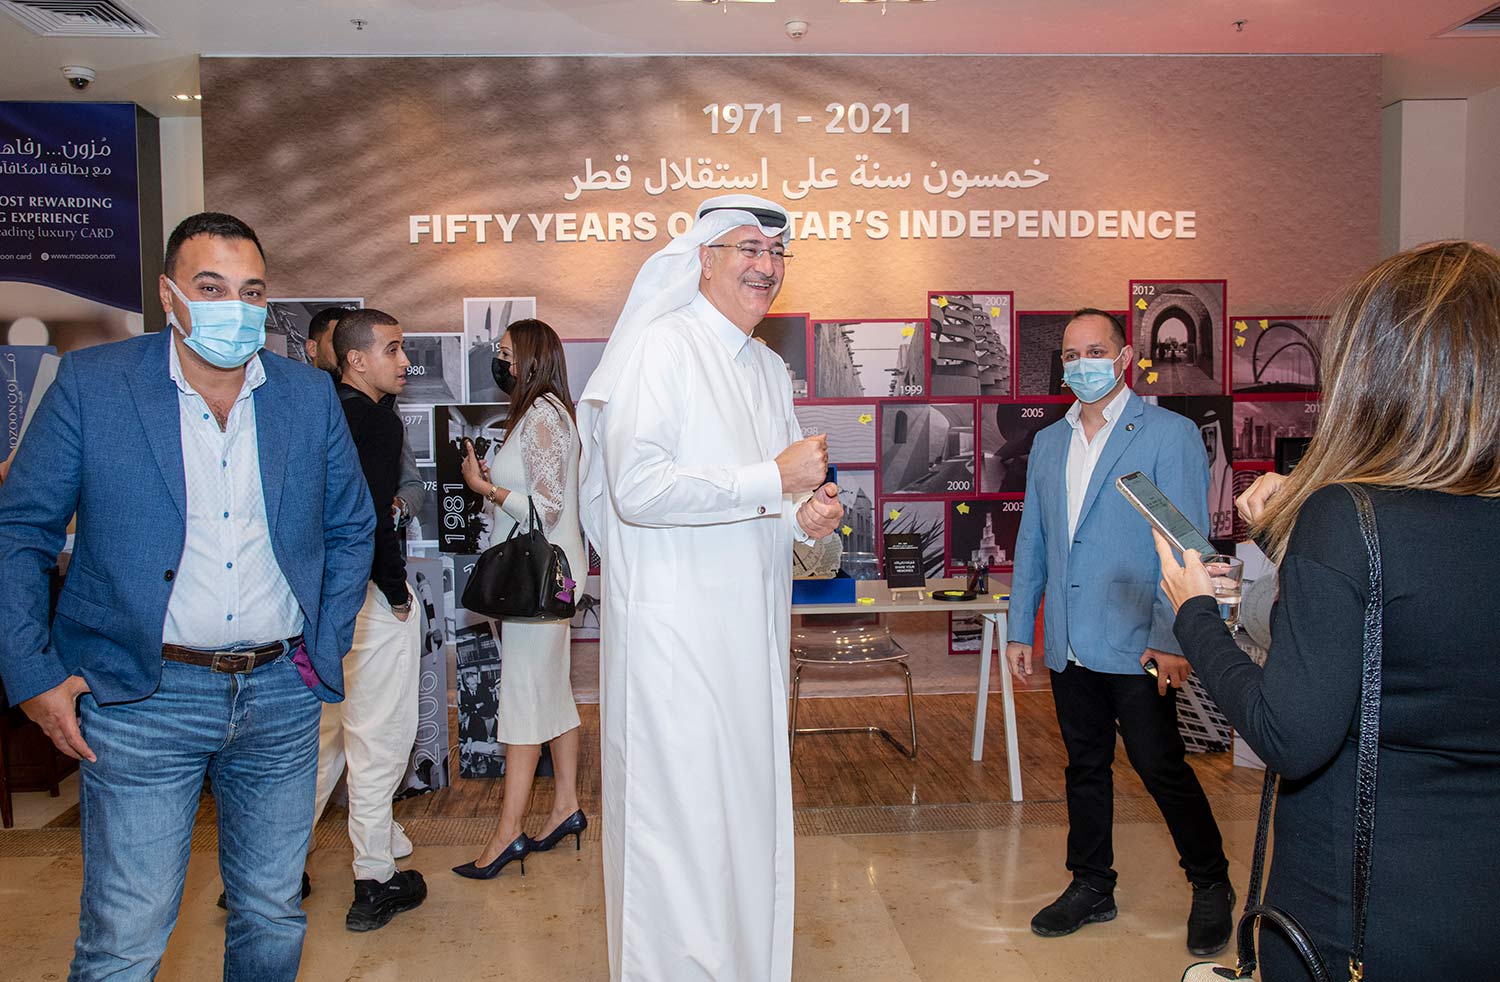 1971 – 2021 FIFTY YEARS OF QATAR’S INDEPENDENCE